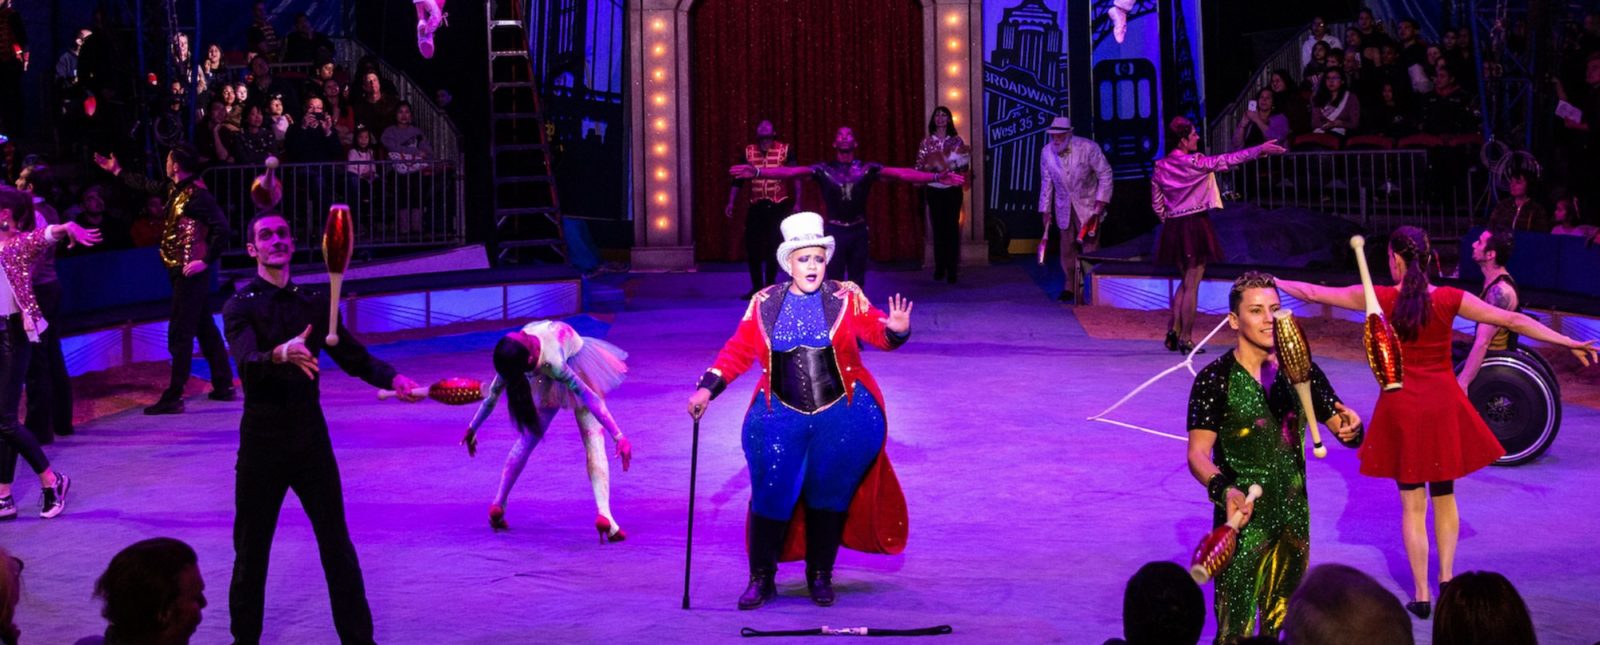 Much like a circus advocate for the ACA, a Big Apple Circus ringmaster supports the acrobats, pin jugglers, and aerialists in the circus ring around her